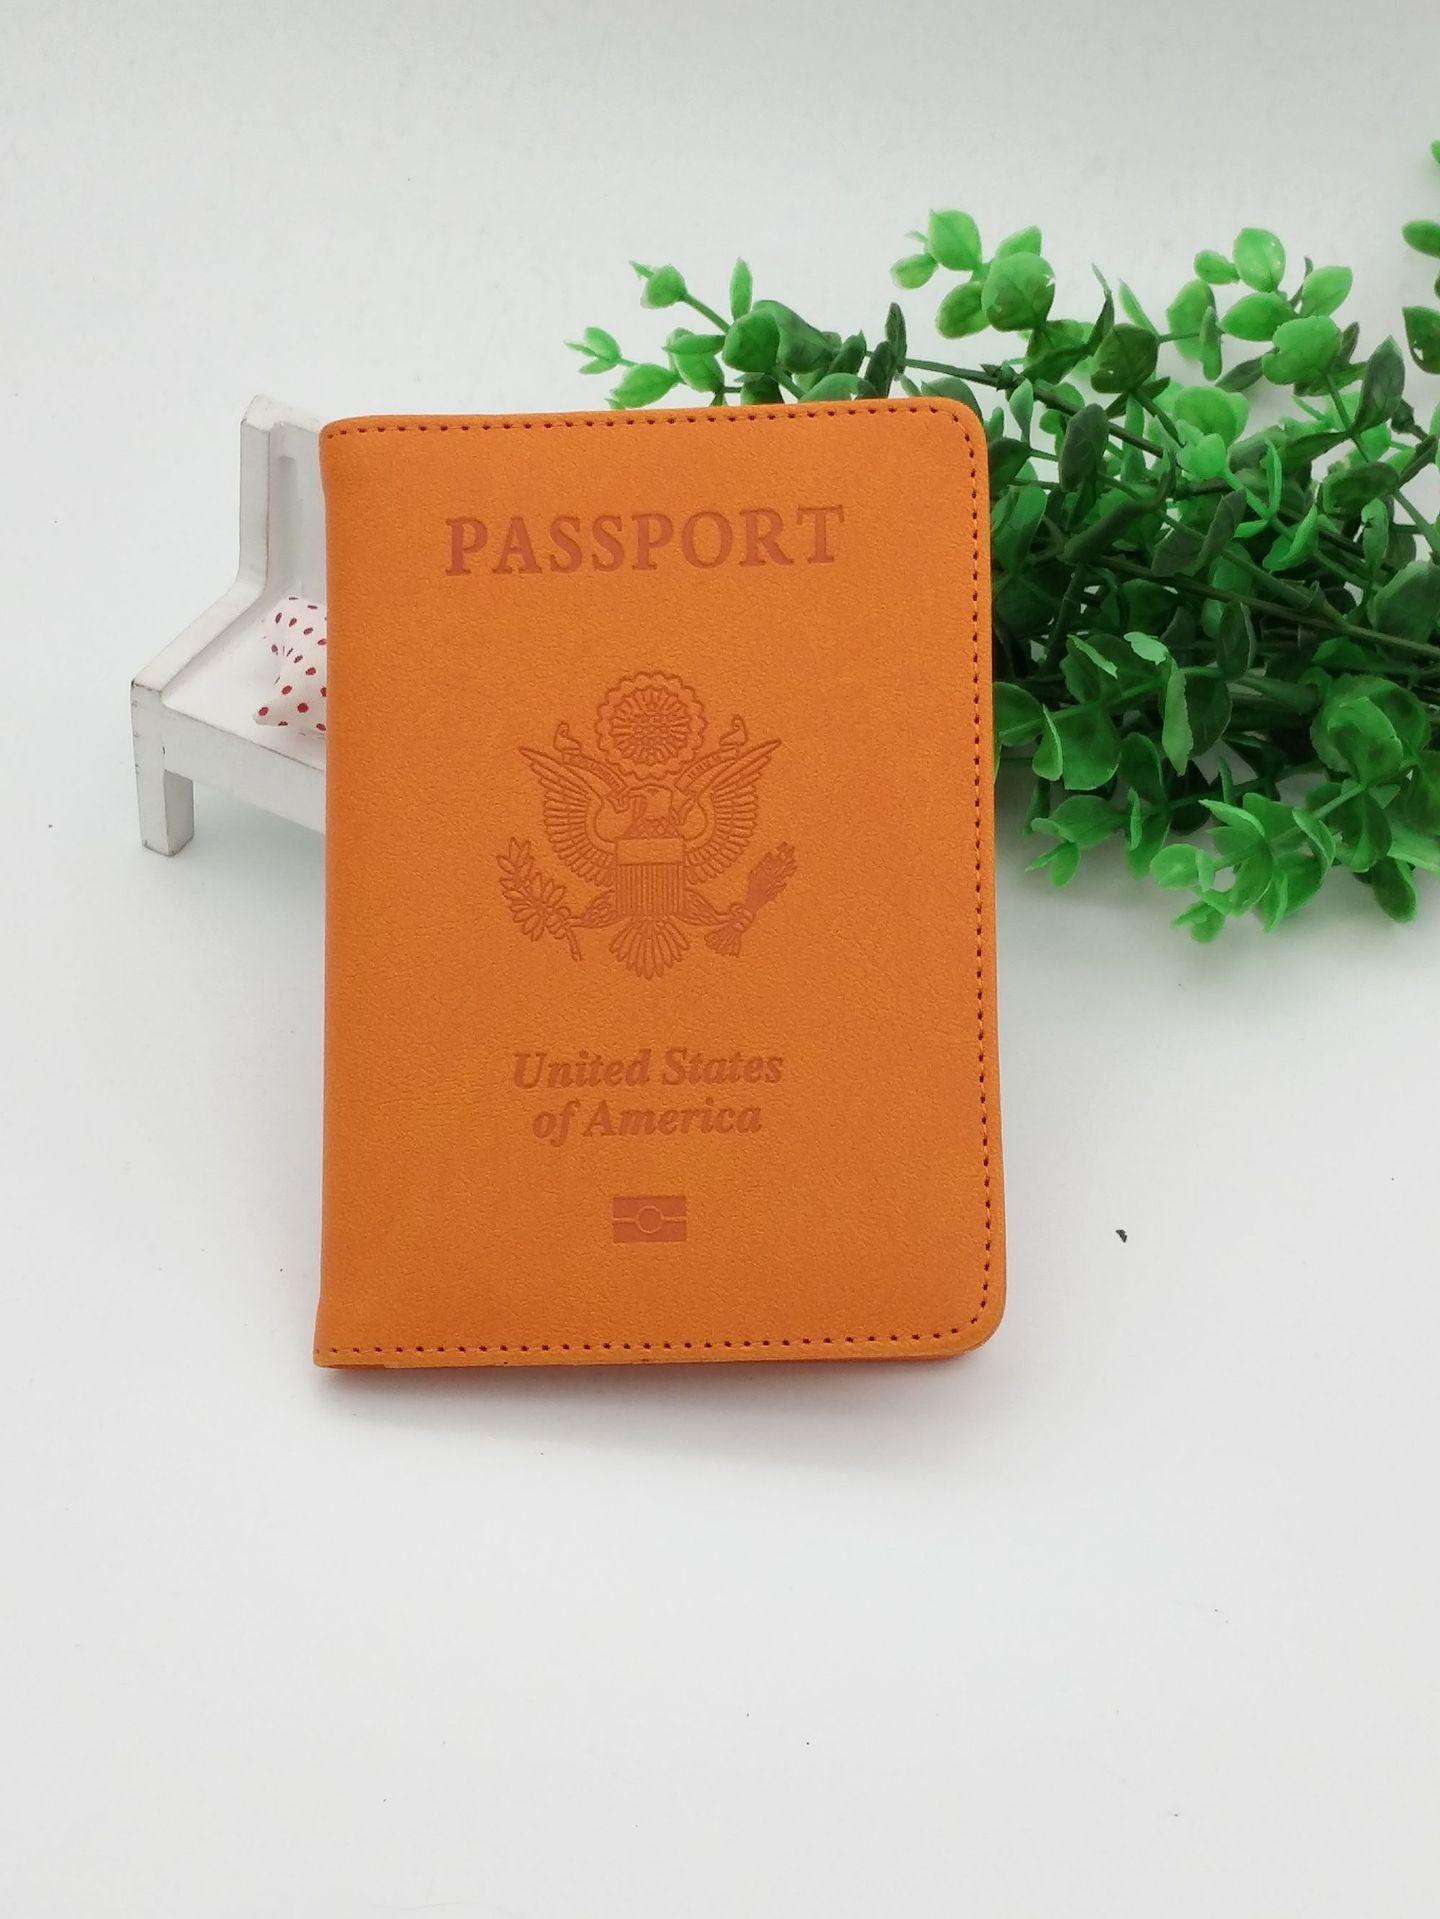 Custom Promotional RFID Passport Cover Faux Leather Cheap Passport Shield